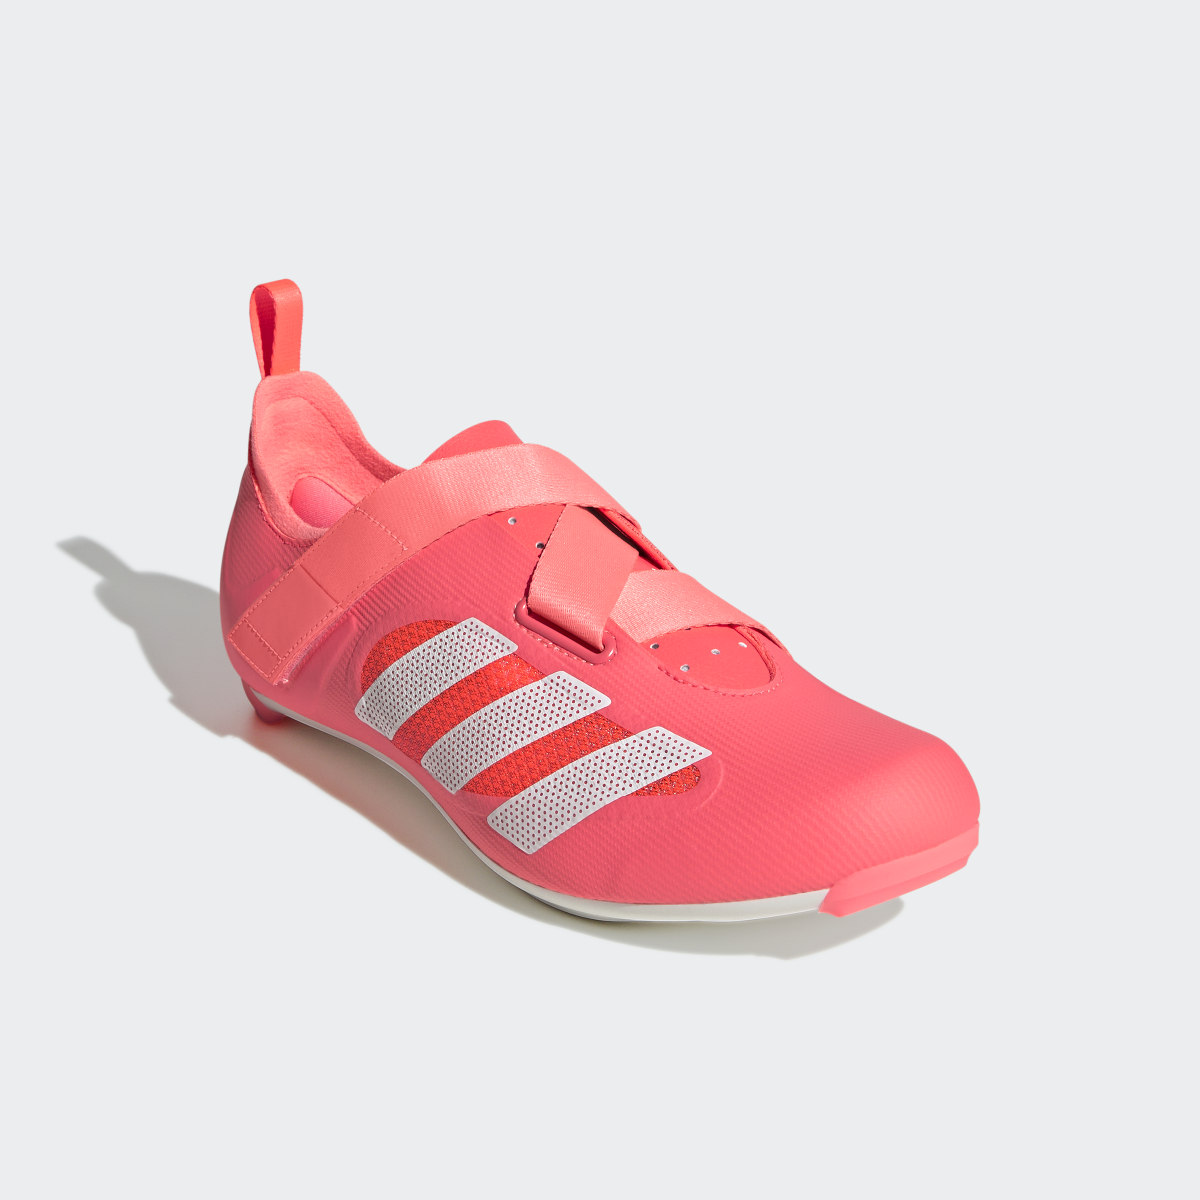 Adidas THE INDOOR CYCLING SHOE. 10